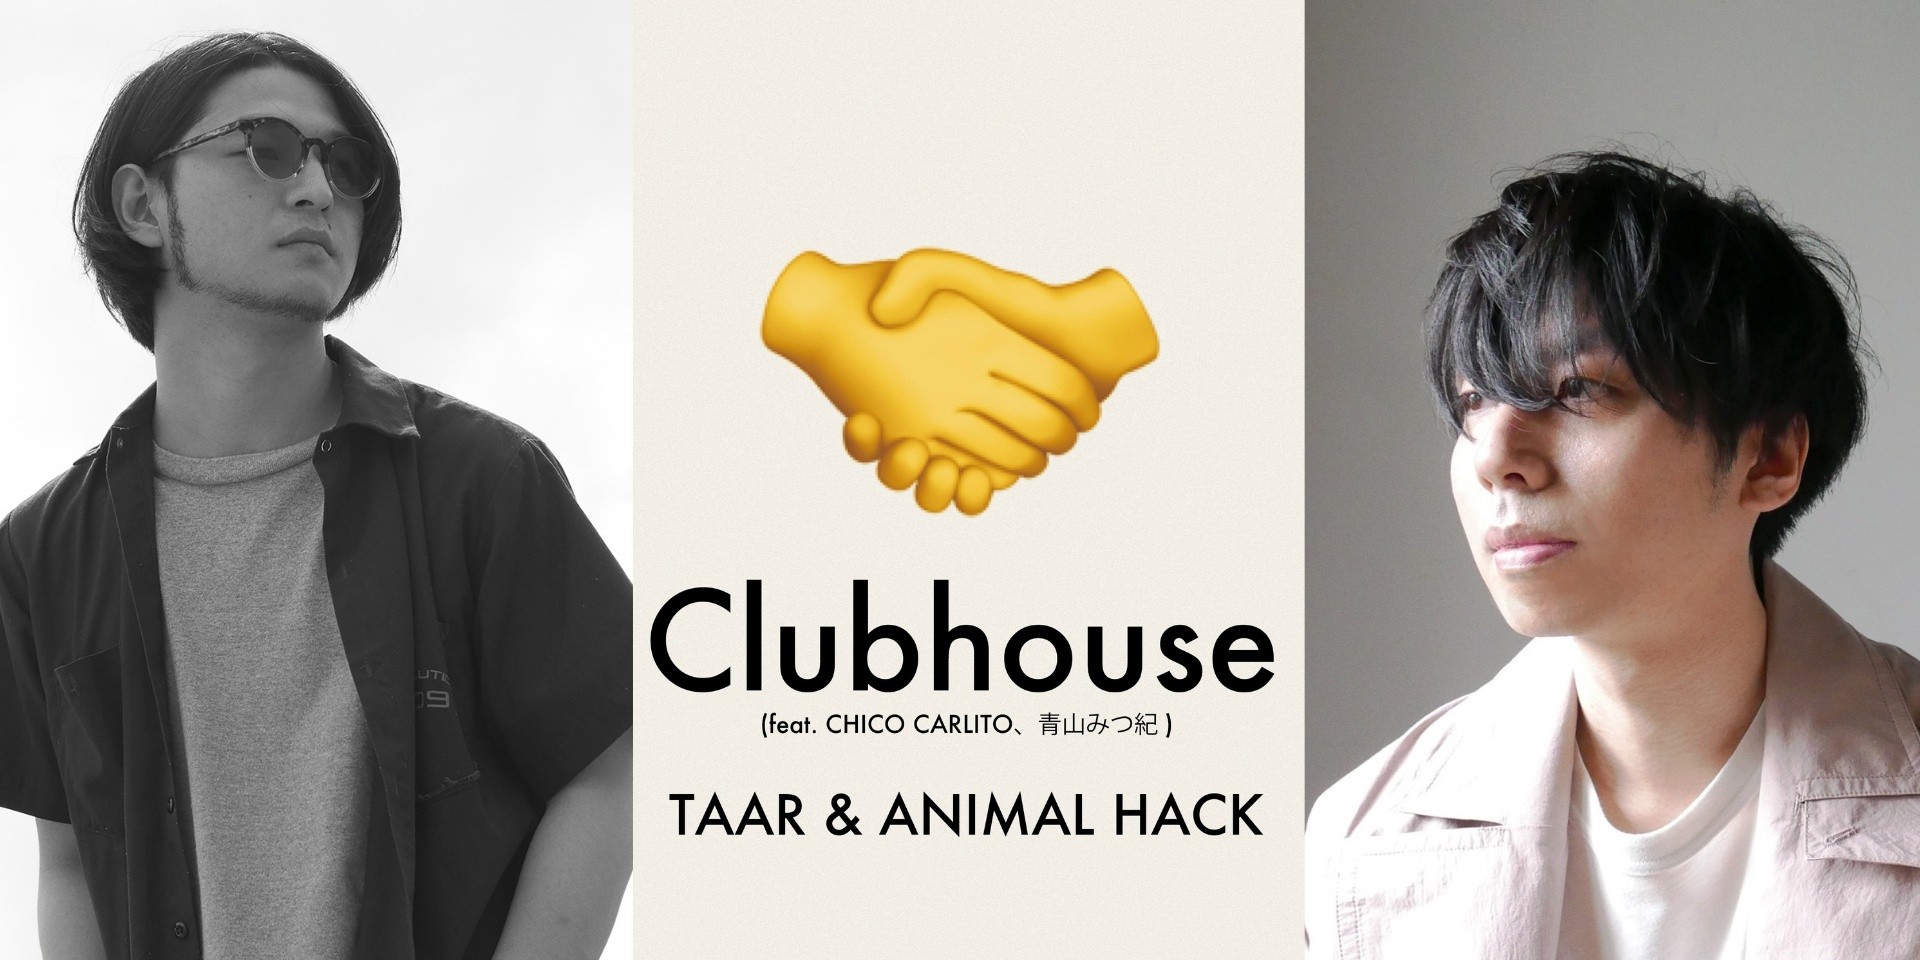 Japanese artists unveil first Japanese song to be produced through Clubhouse app